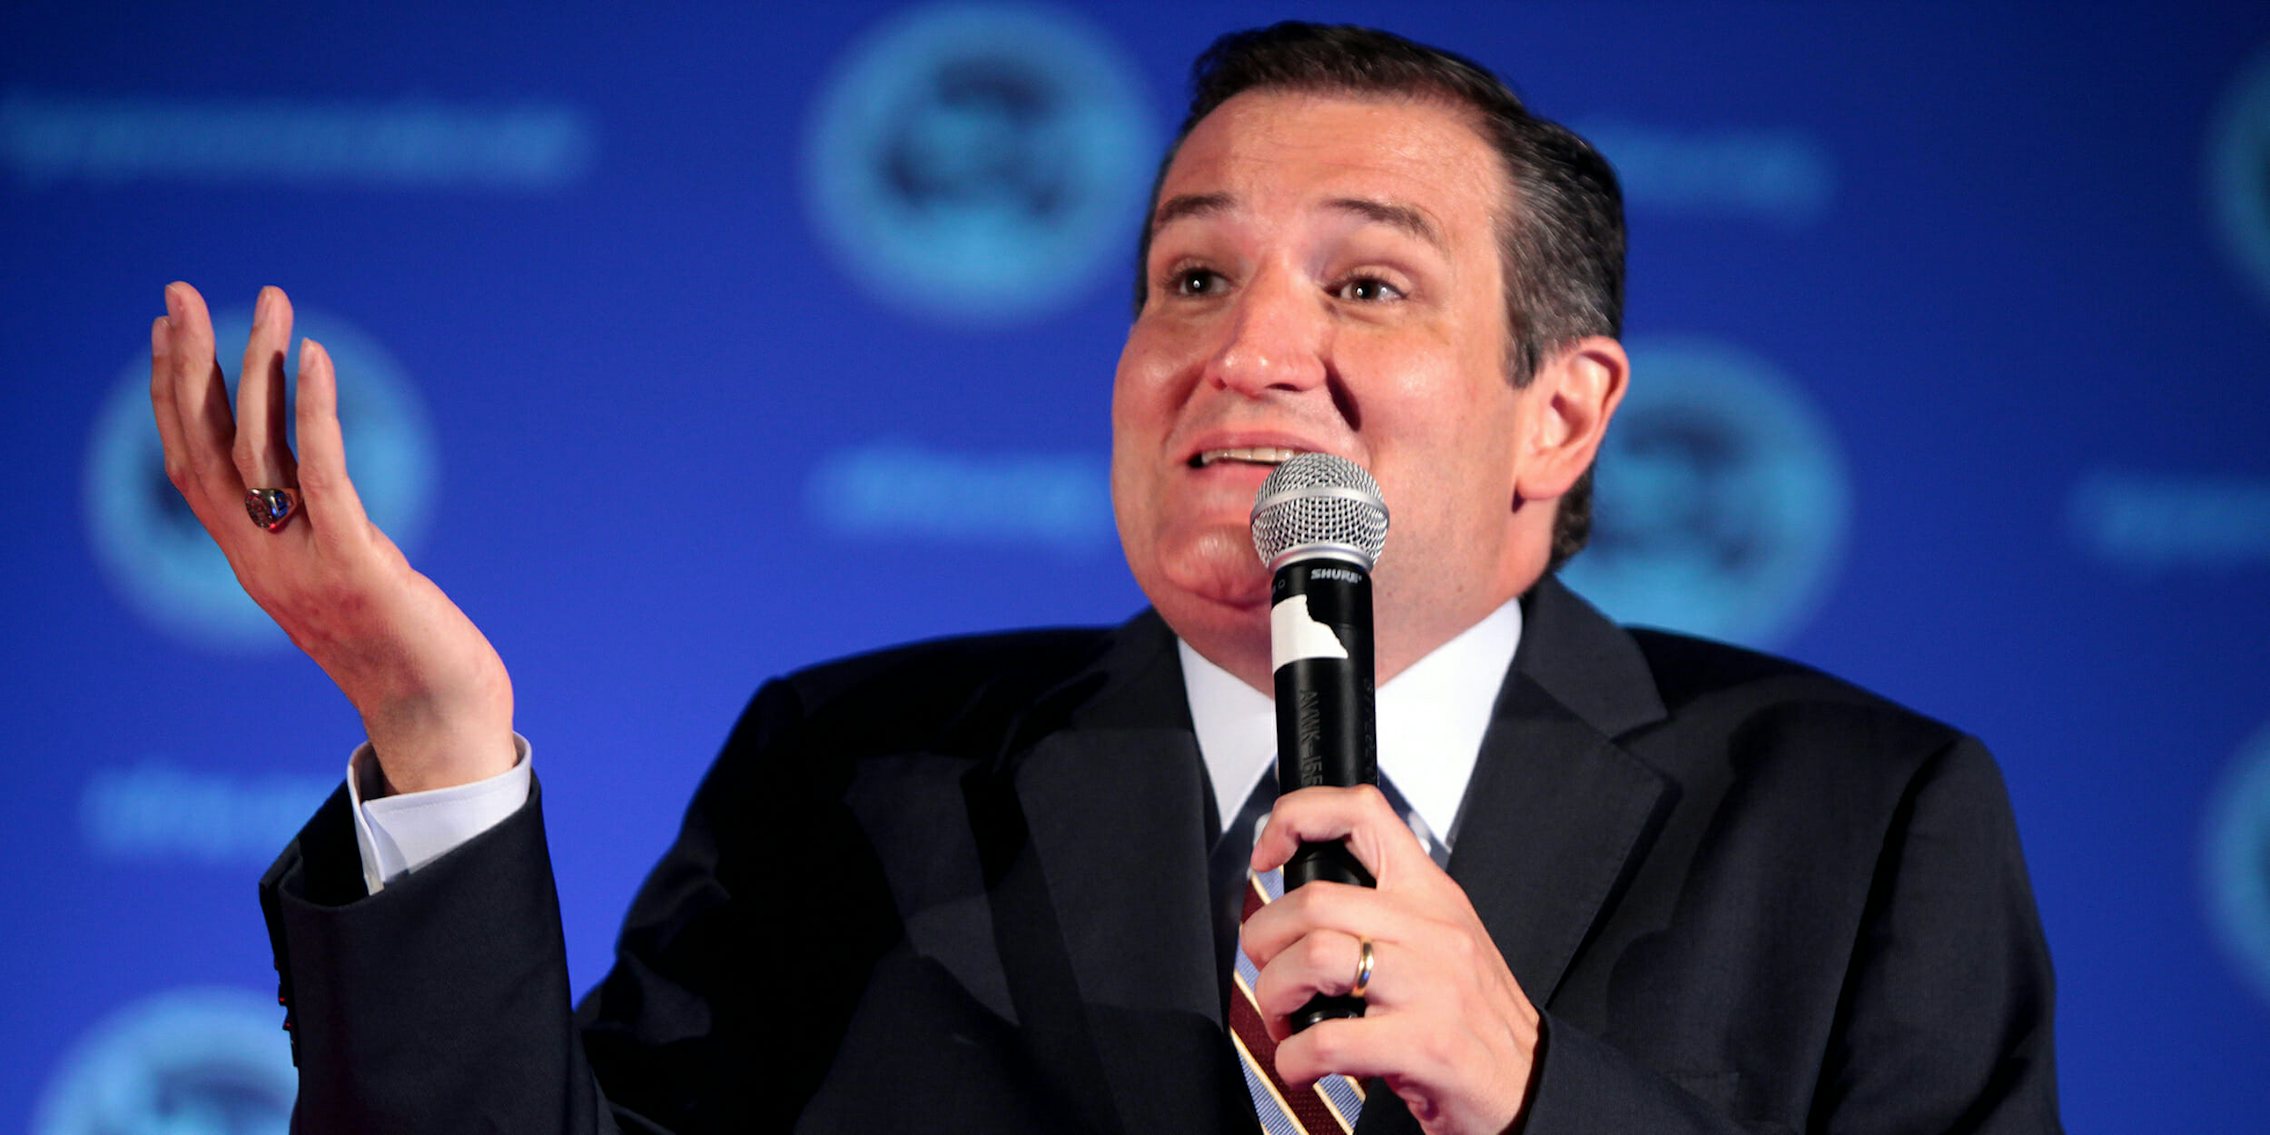 Ted Cruz shrugging his shoulders with one hand in the air